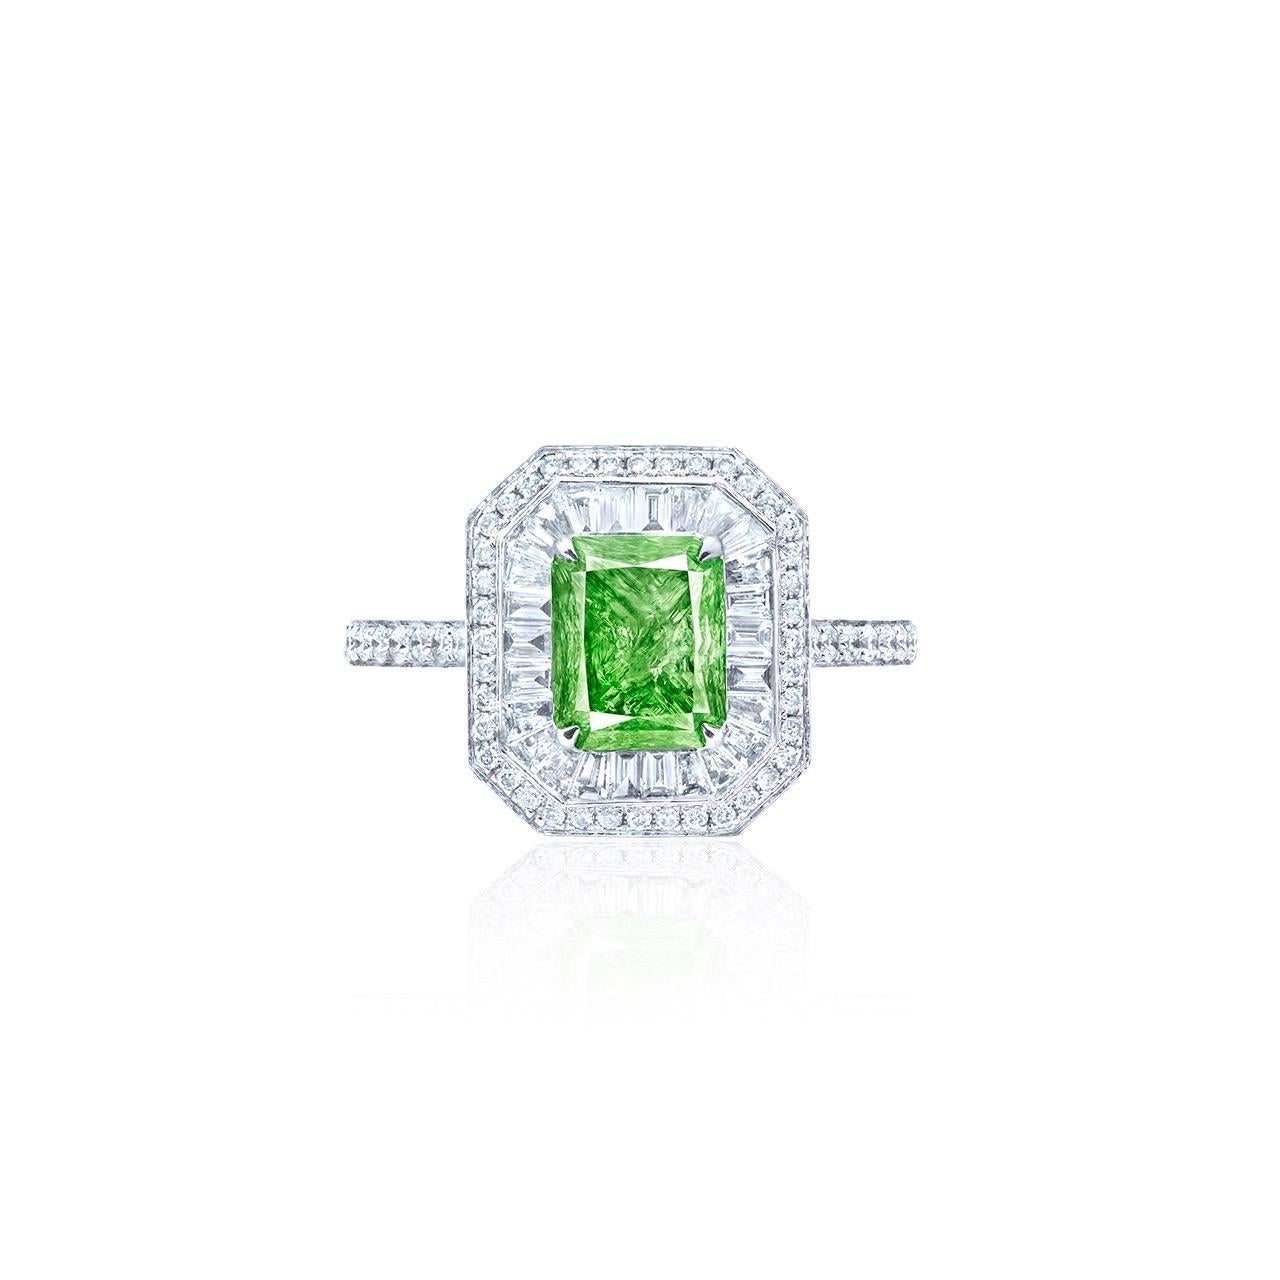 Radiant Cut Emilio Jewelry GIA Certified Fancy Intense Pure Green Diamond Ring For Sale